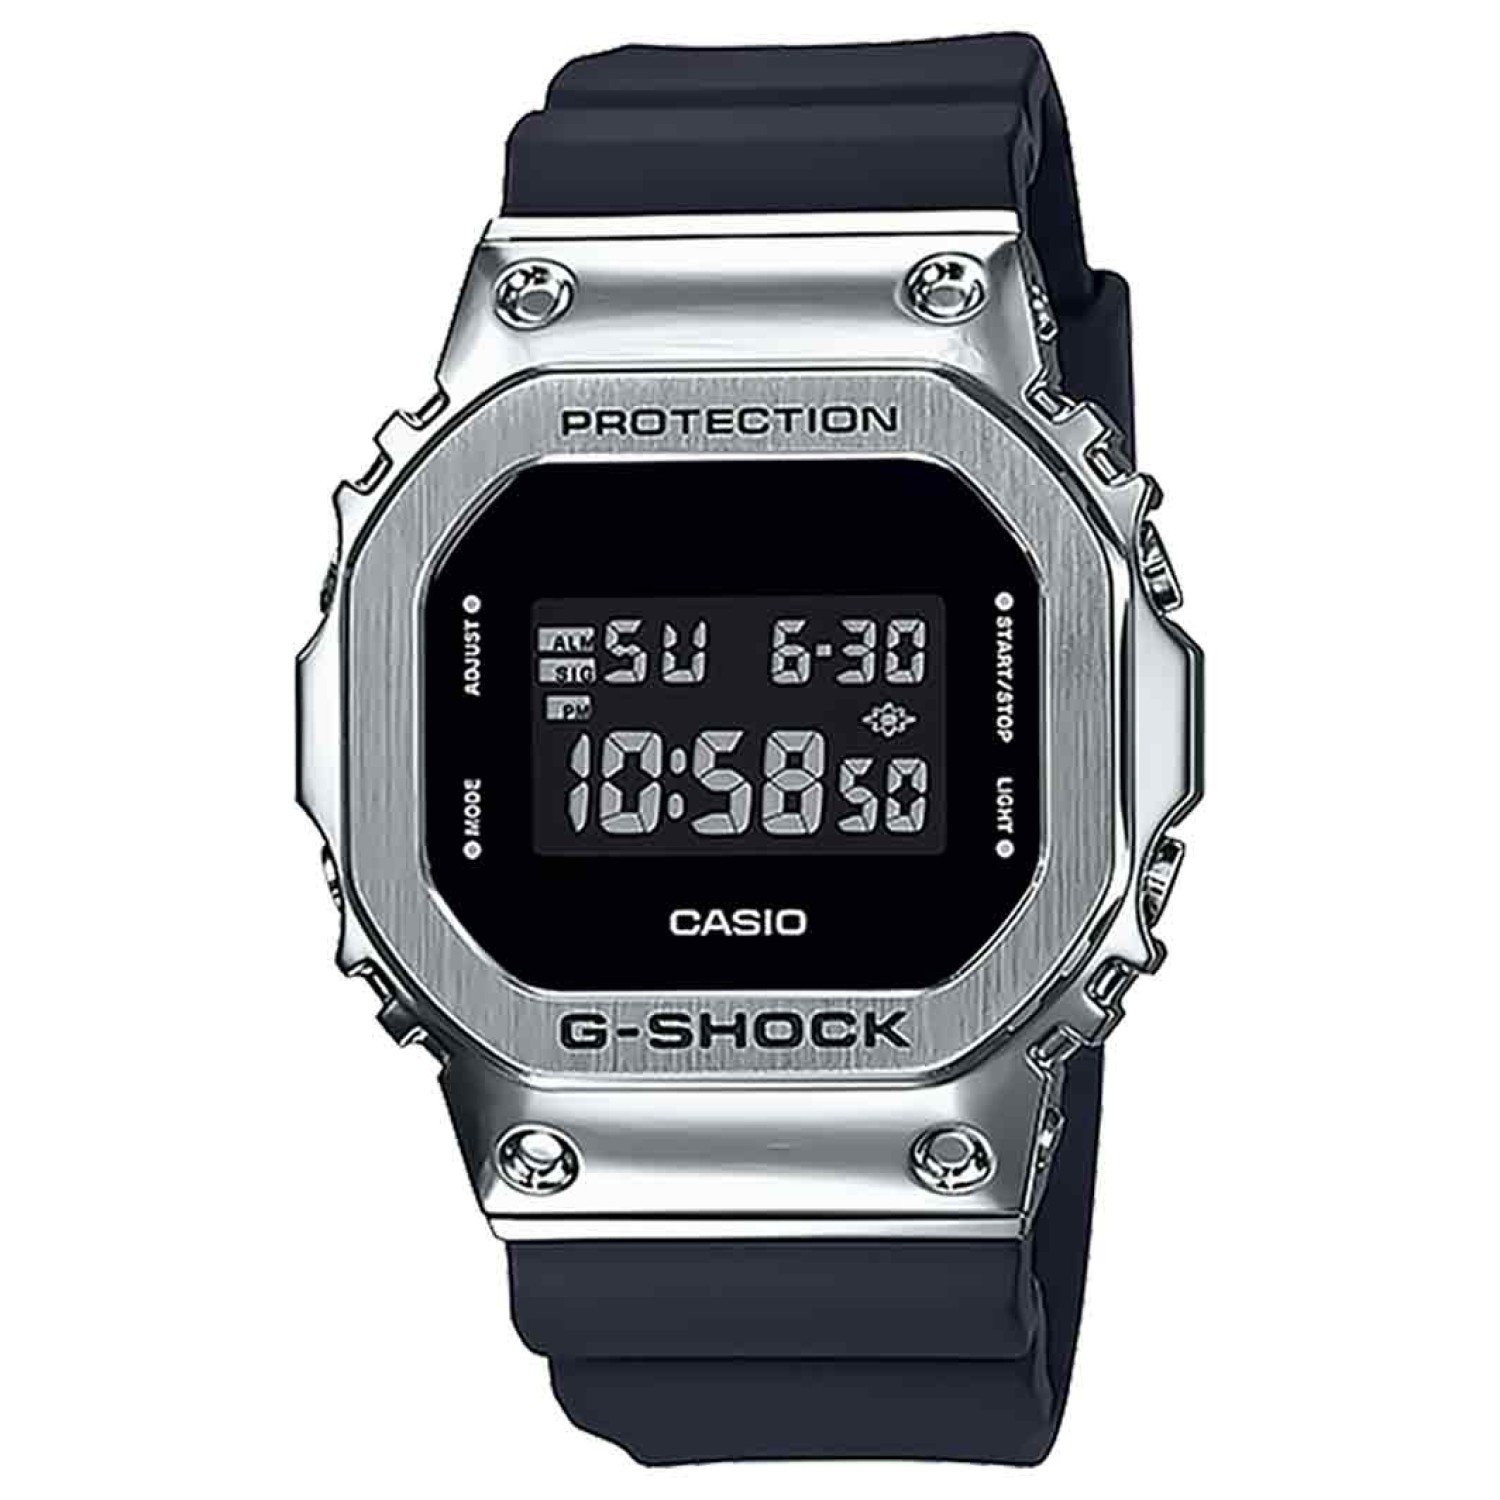 GM5600-1D G-Shock Metal Bezel Watch. Introducing a new selection of models that adds metal parts to the design of the square-face 5600 Series G-SHOCK, the watch that has been revolutionizing personal timekeeping since 1983. These new models use resin for 